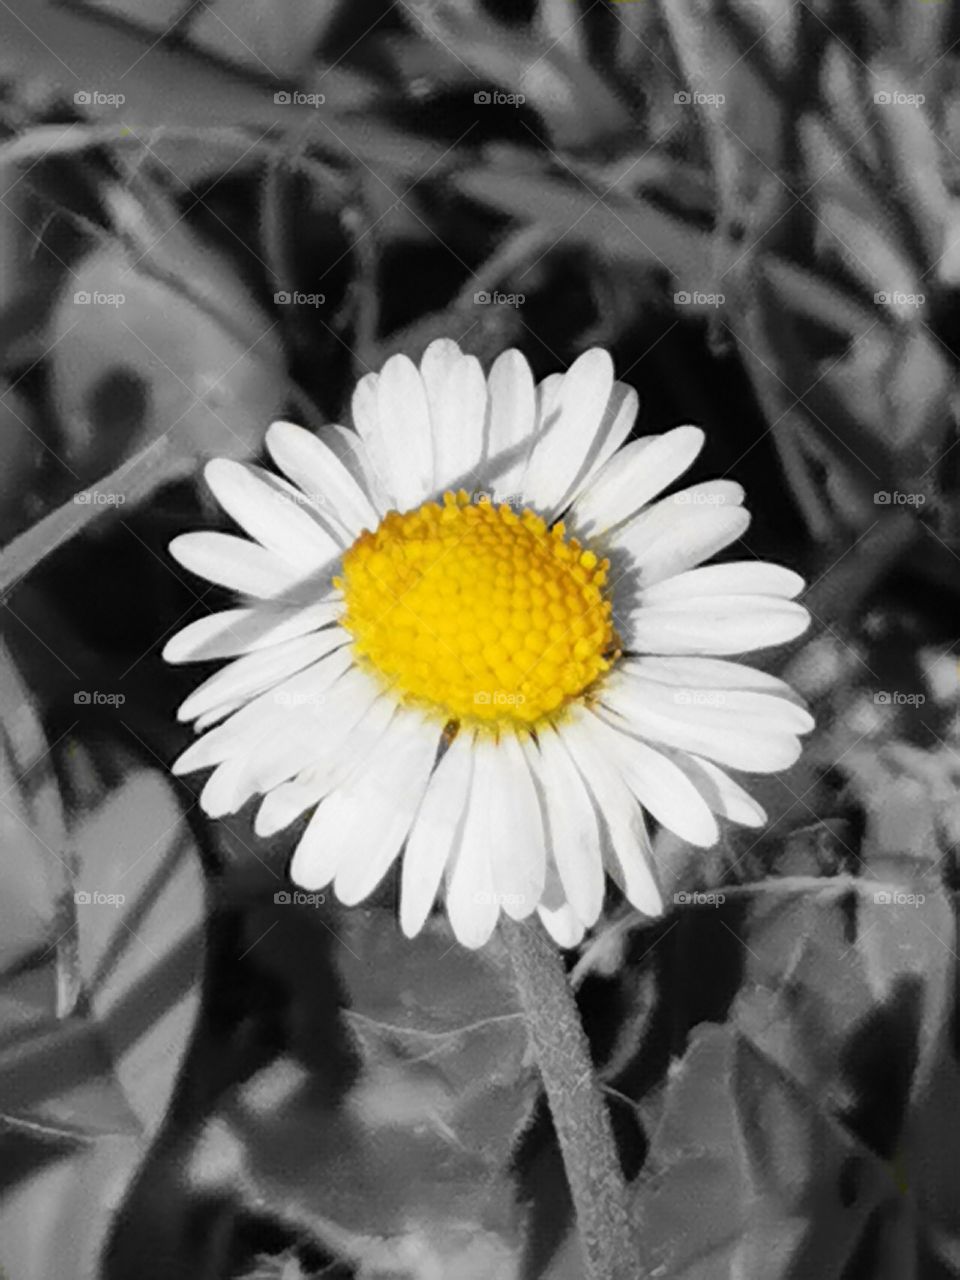 Daisy in black and white grass